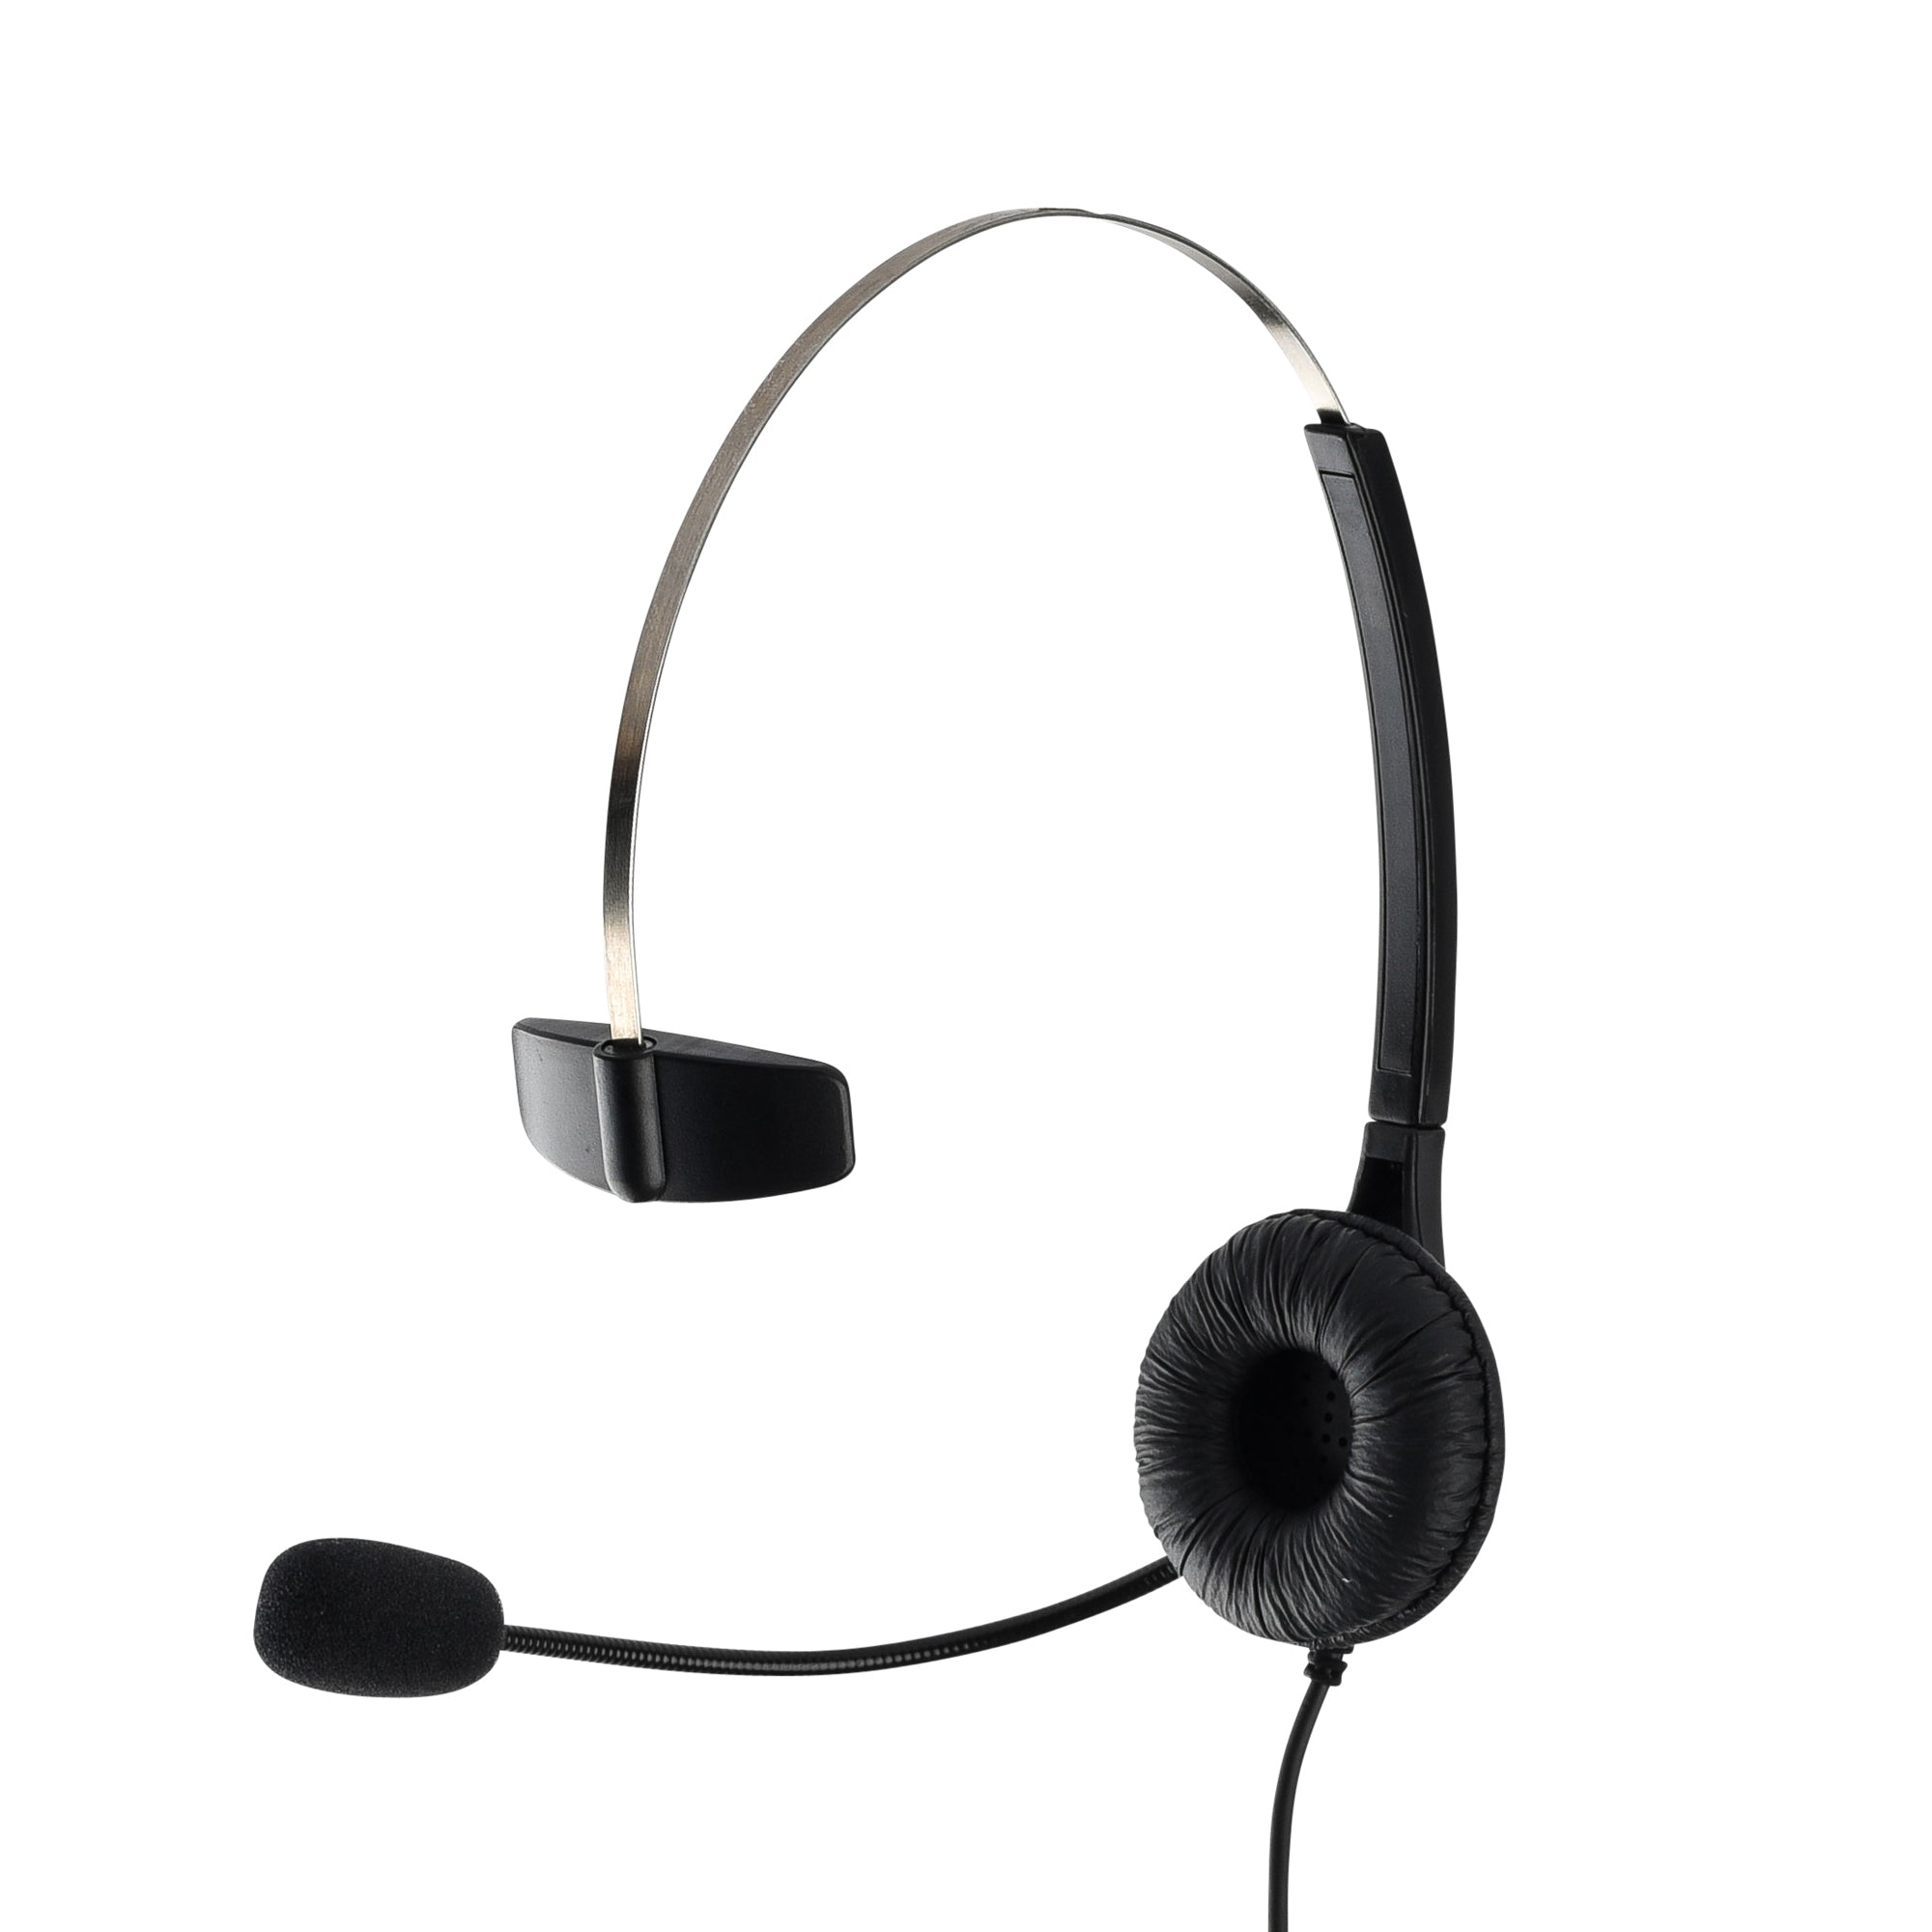 Motorola PMLN4445 Mag One Headset with PTT/VOX Switch